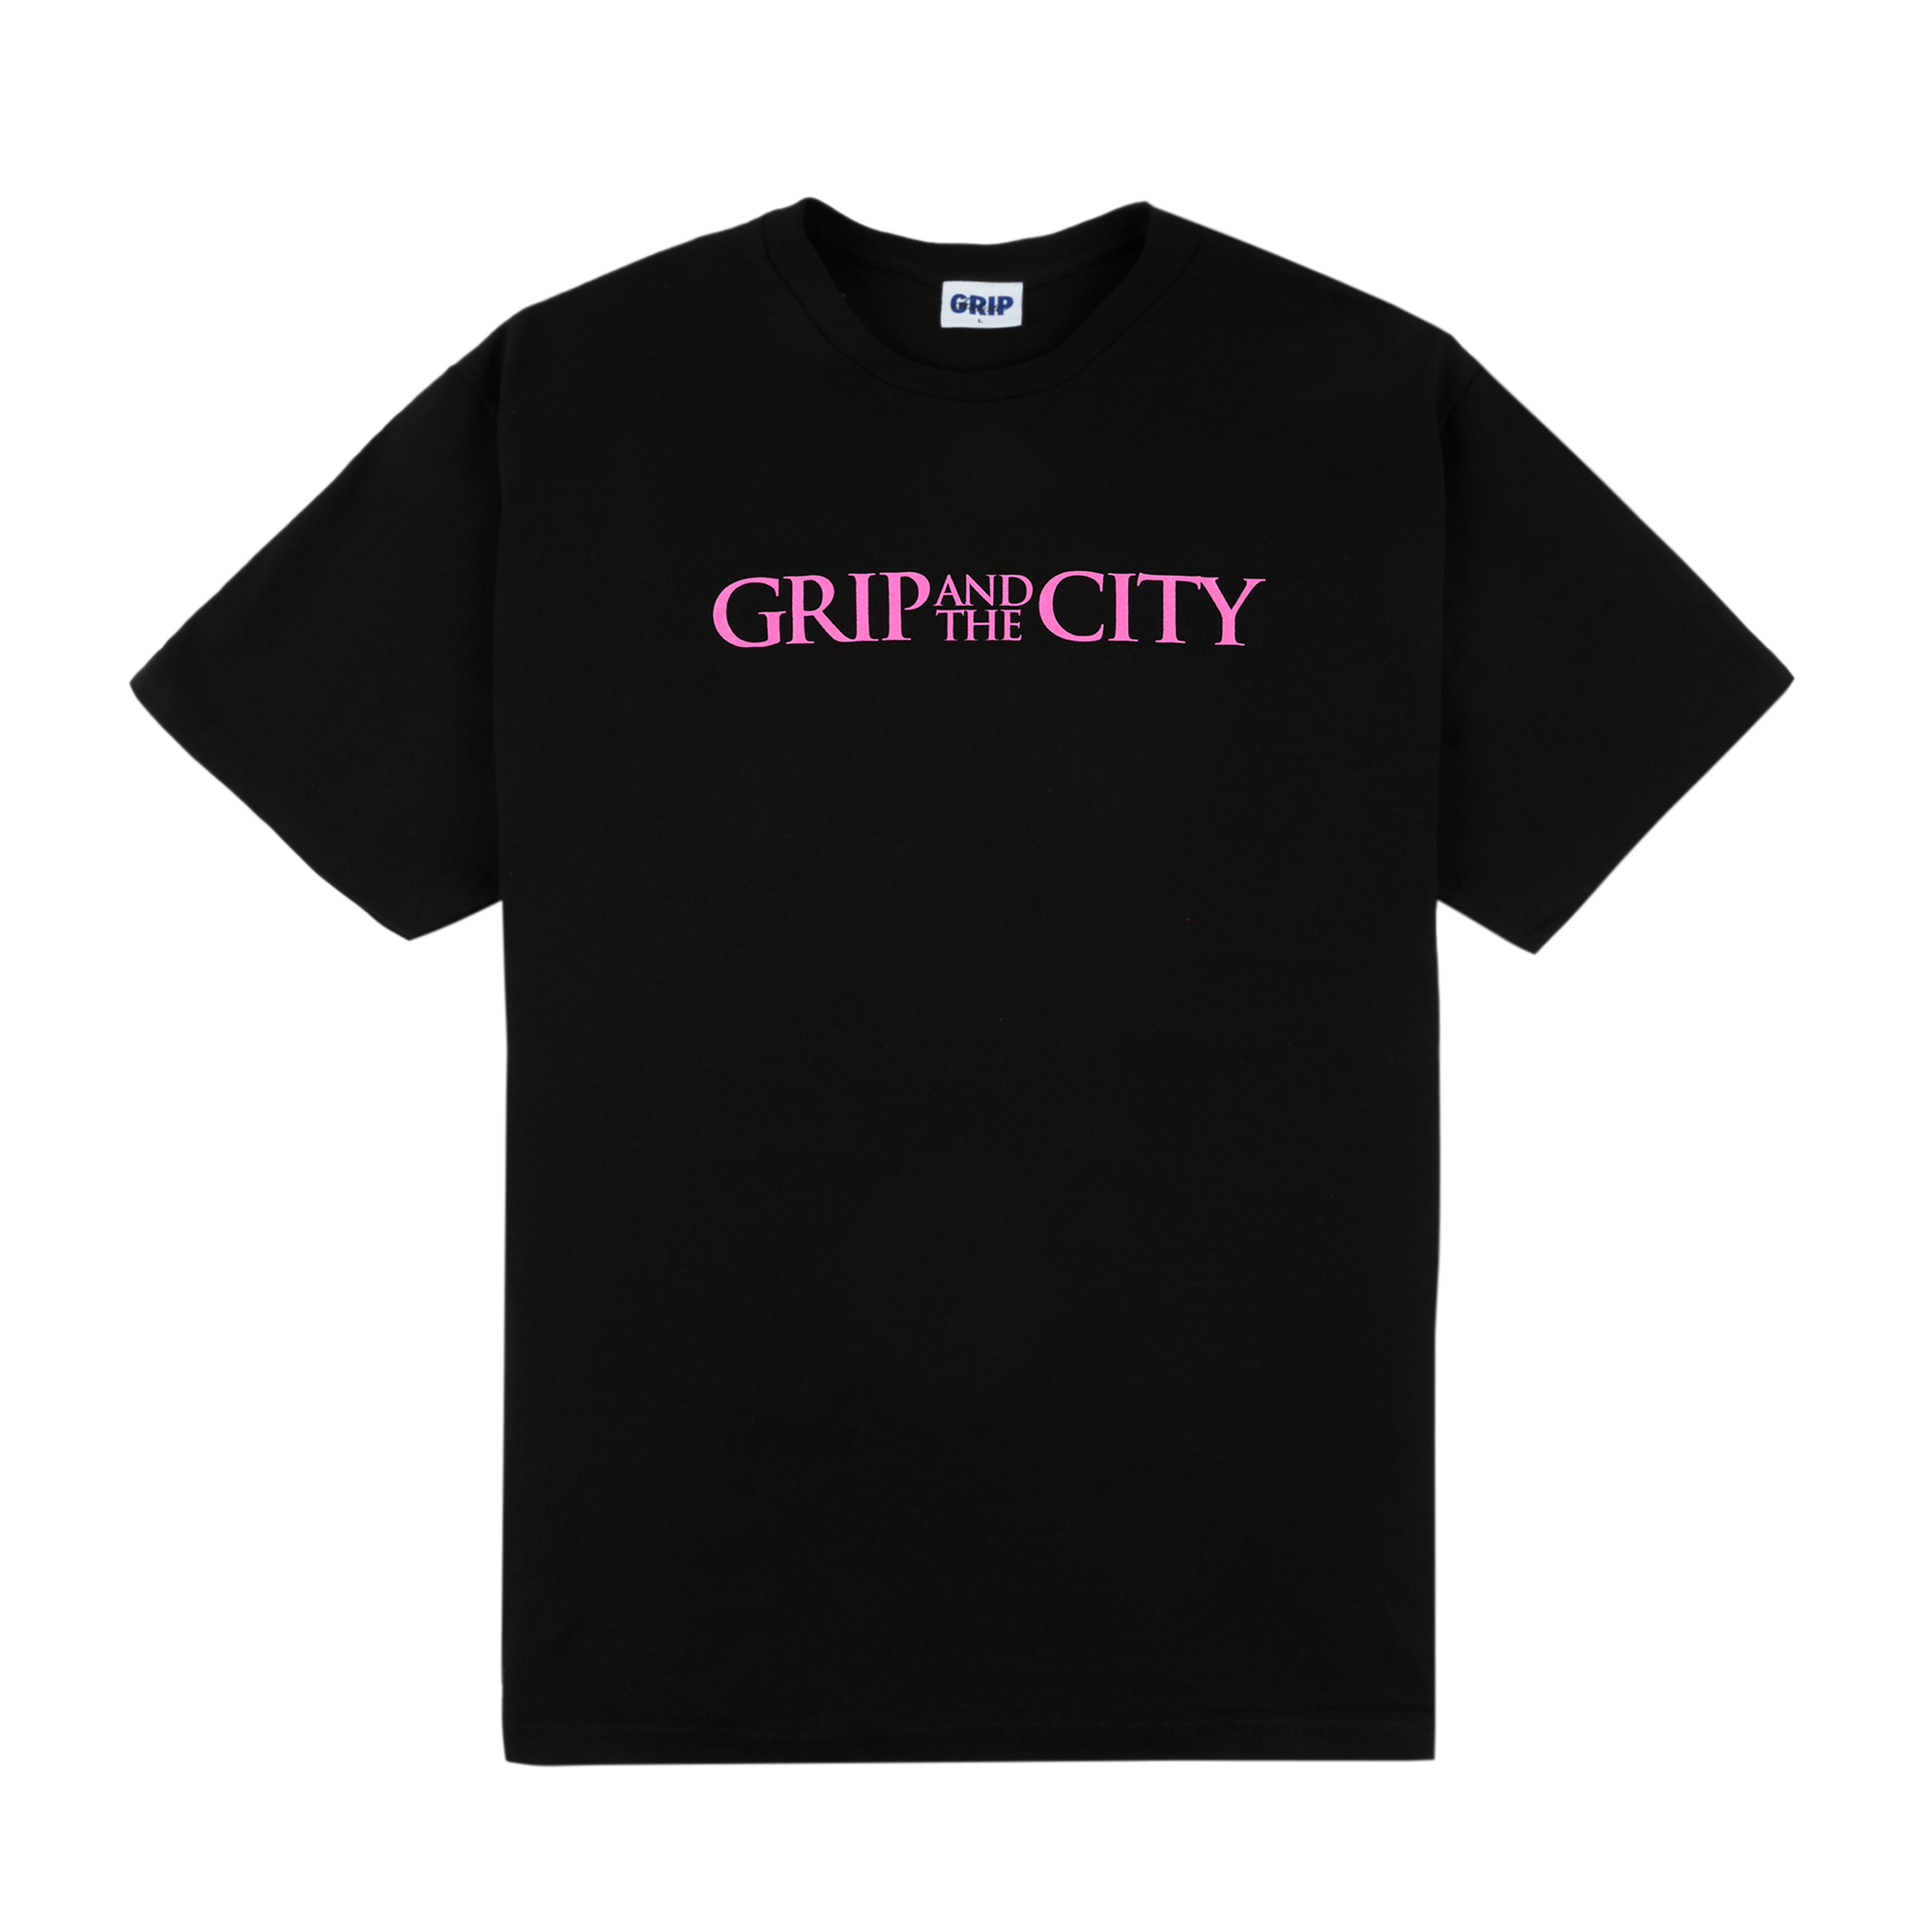 Classic Grip Grip and the City Tee Black